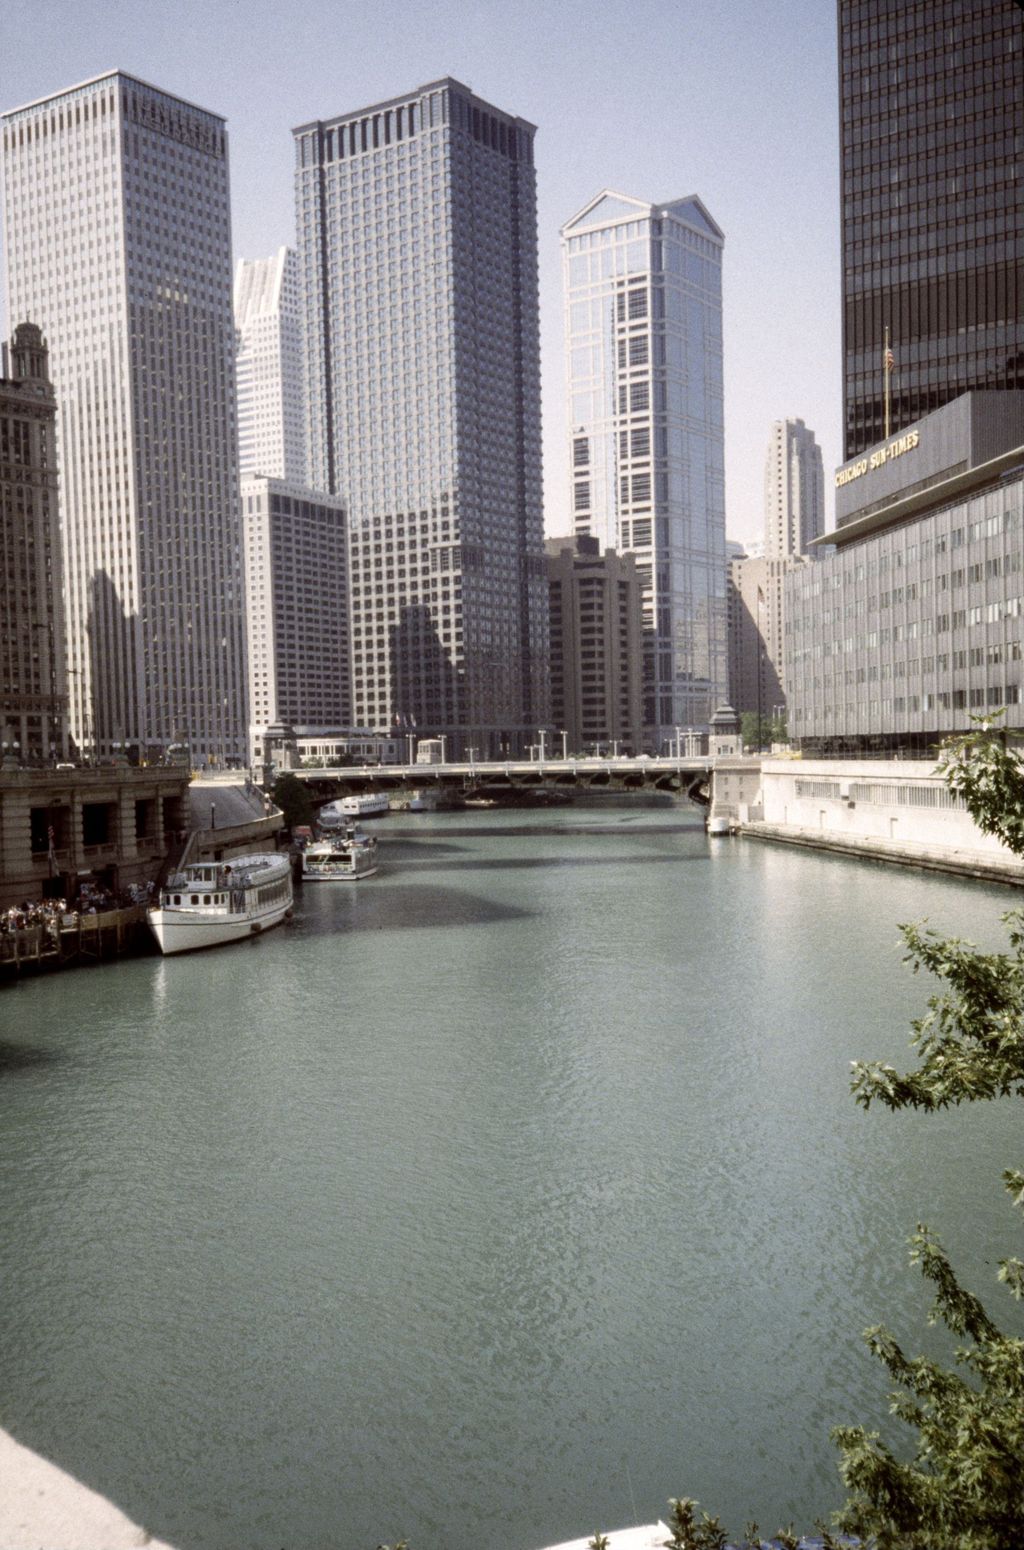 Miniature of Chicago River and high-rise towers along Wacker Drive